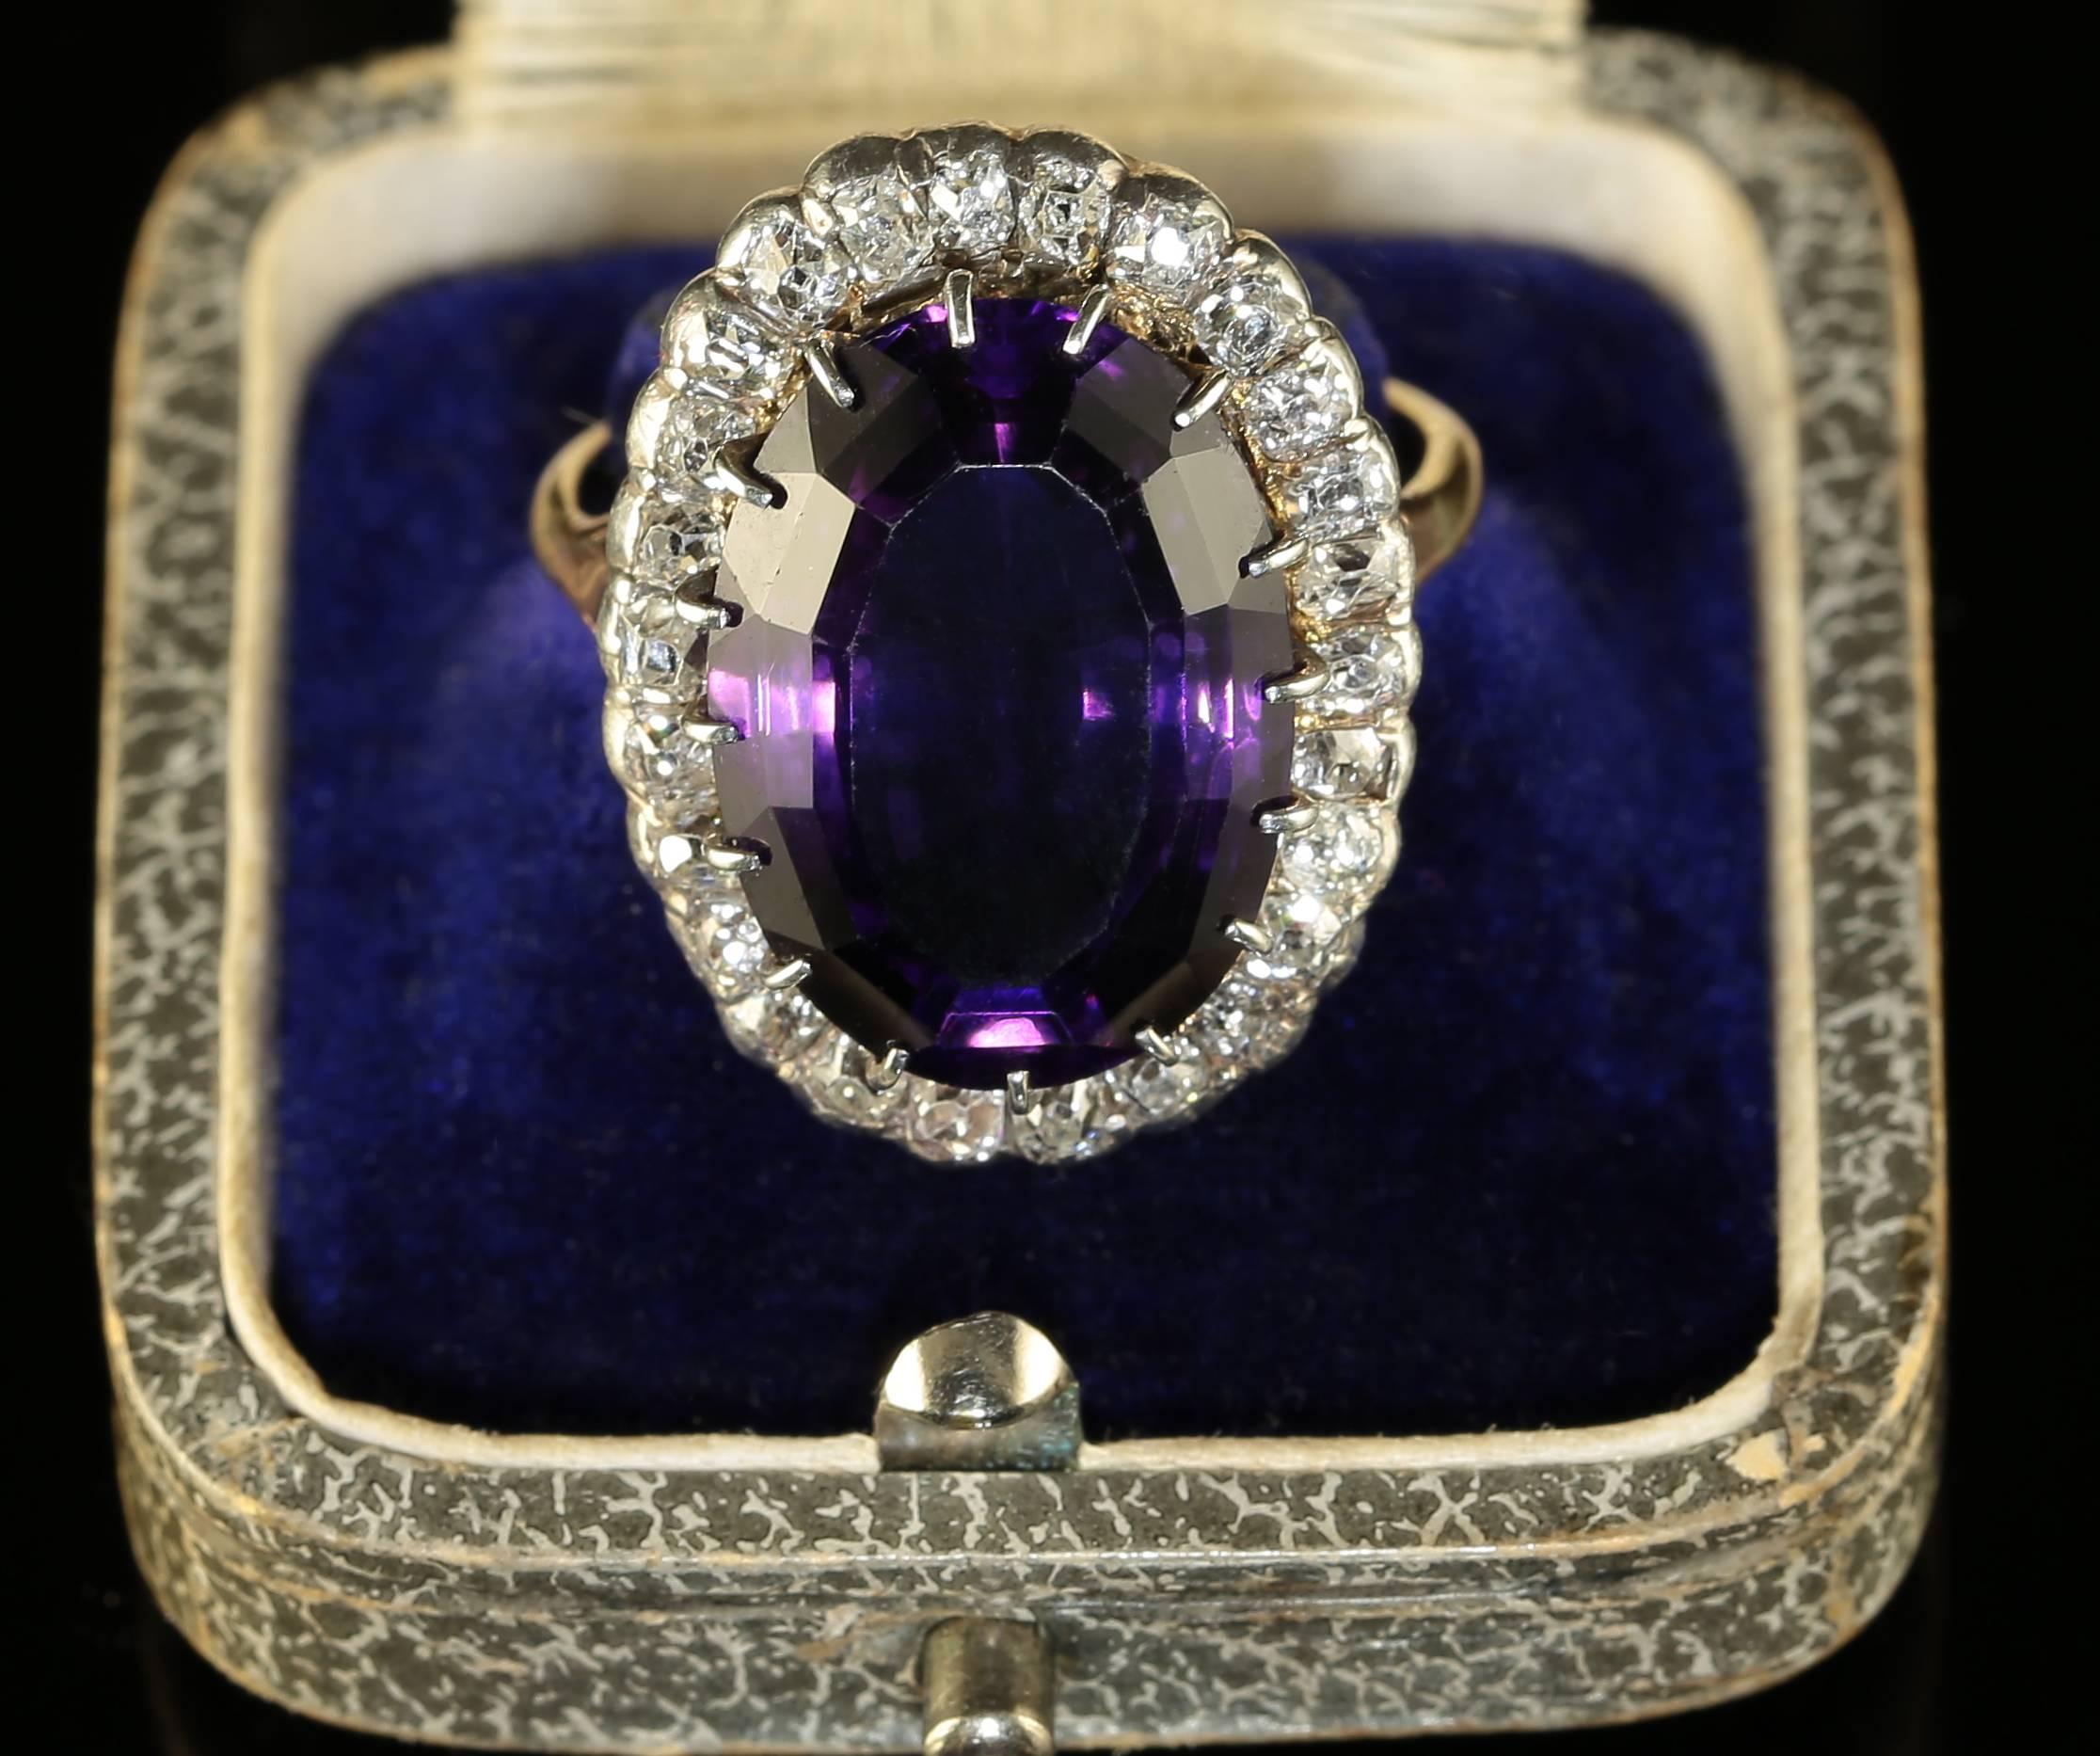 Antique Victorian Amethyst Diamond Ring, circa 1900 16 Carat Amethyst In Excellent Condition For Sale In Lancaster, Lancashire